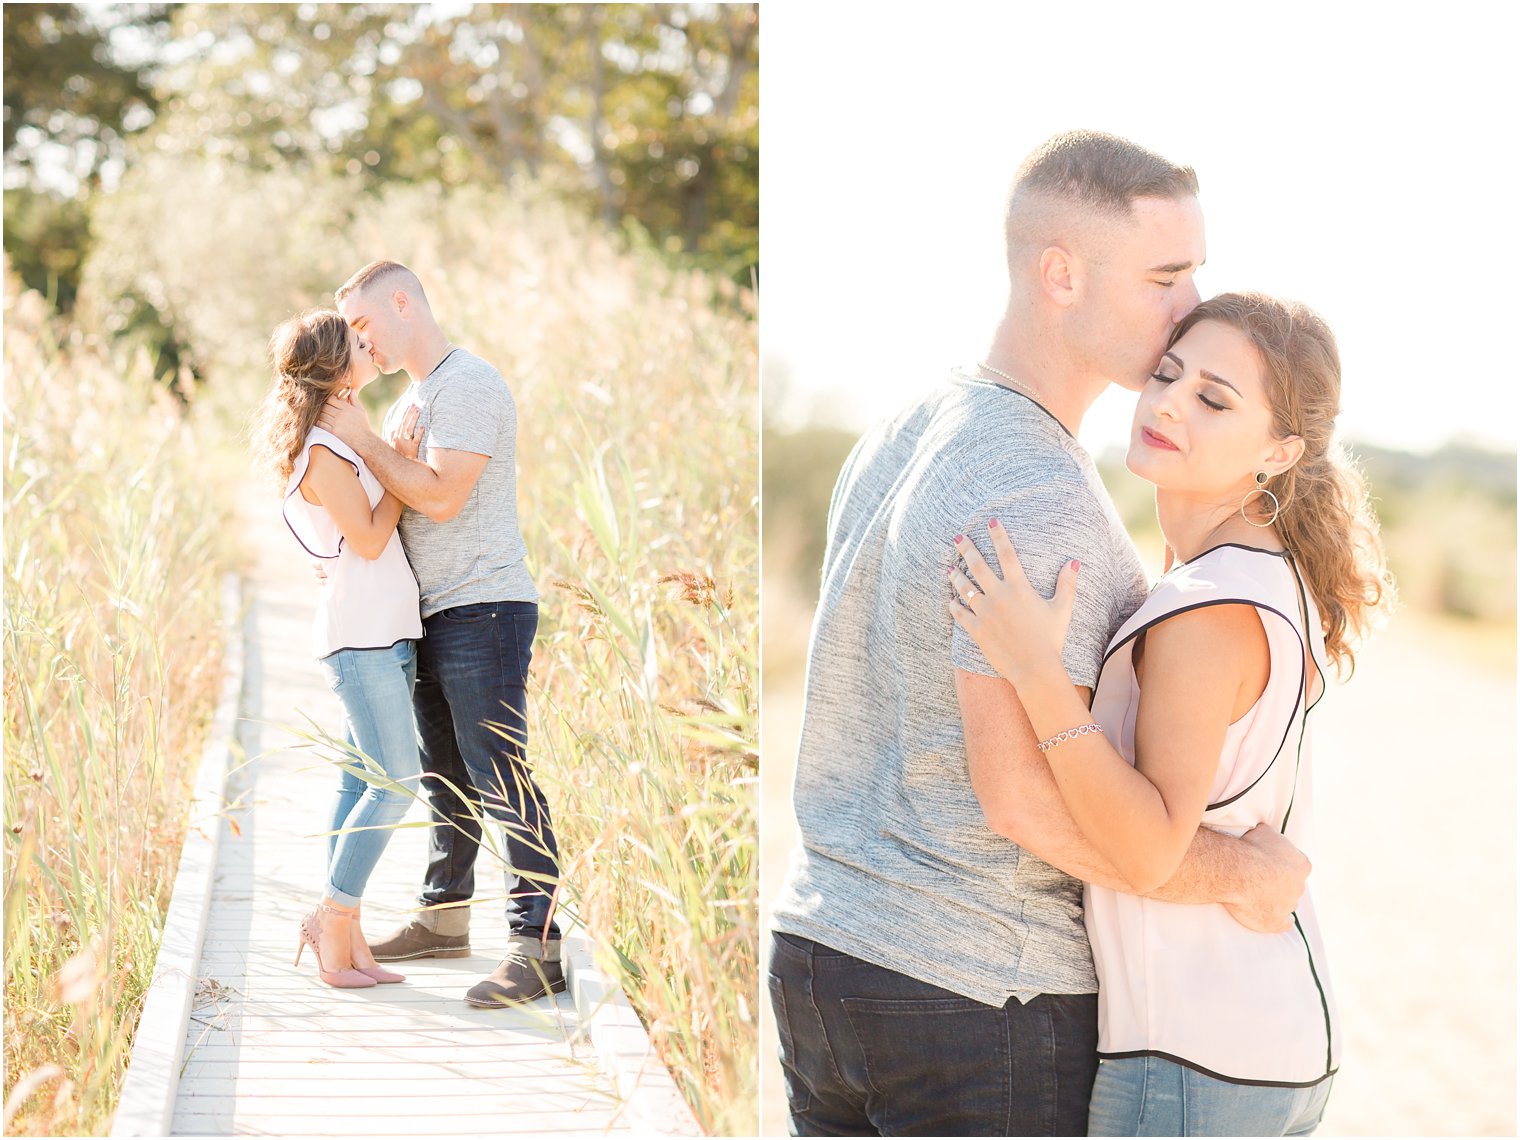 Engagement session in Cape May | Photos by Idalia Photography